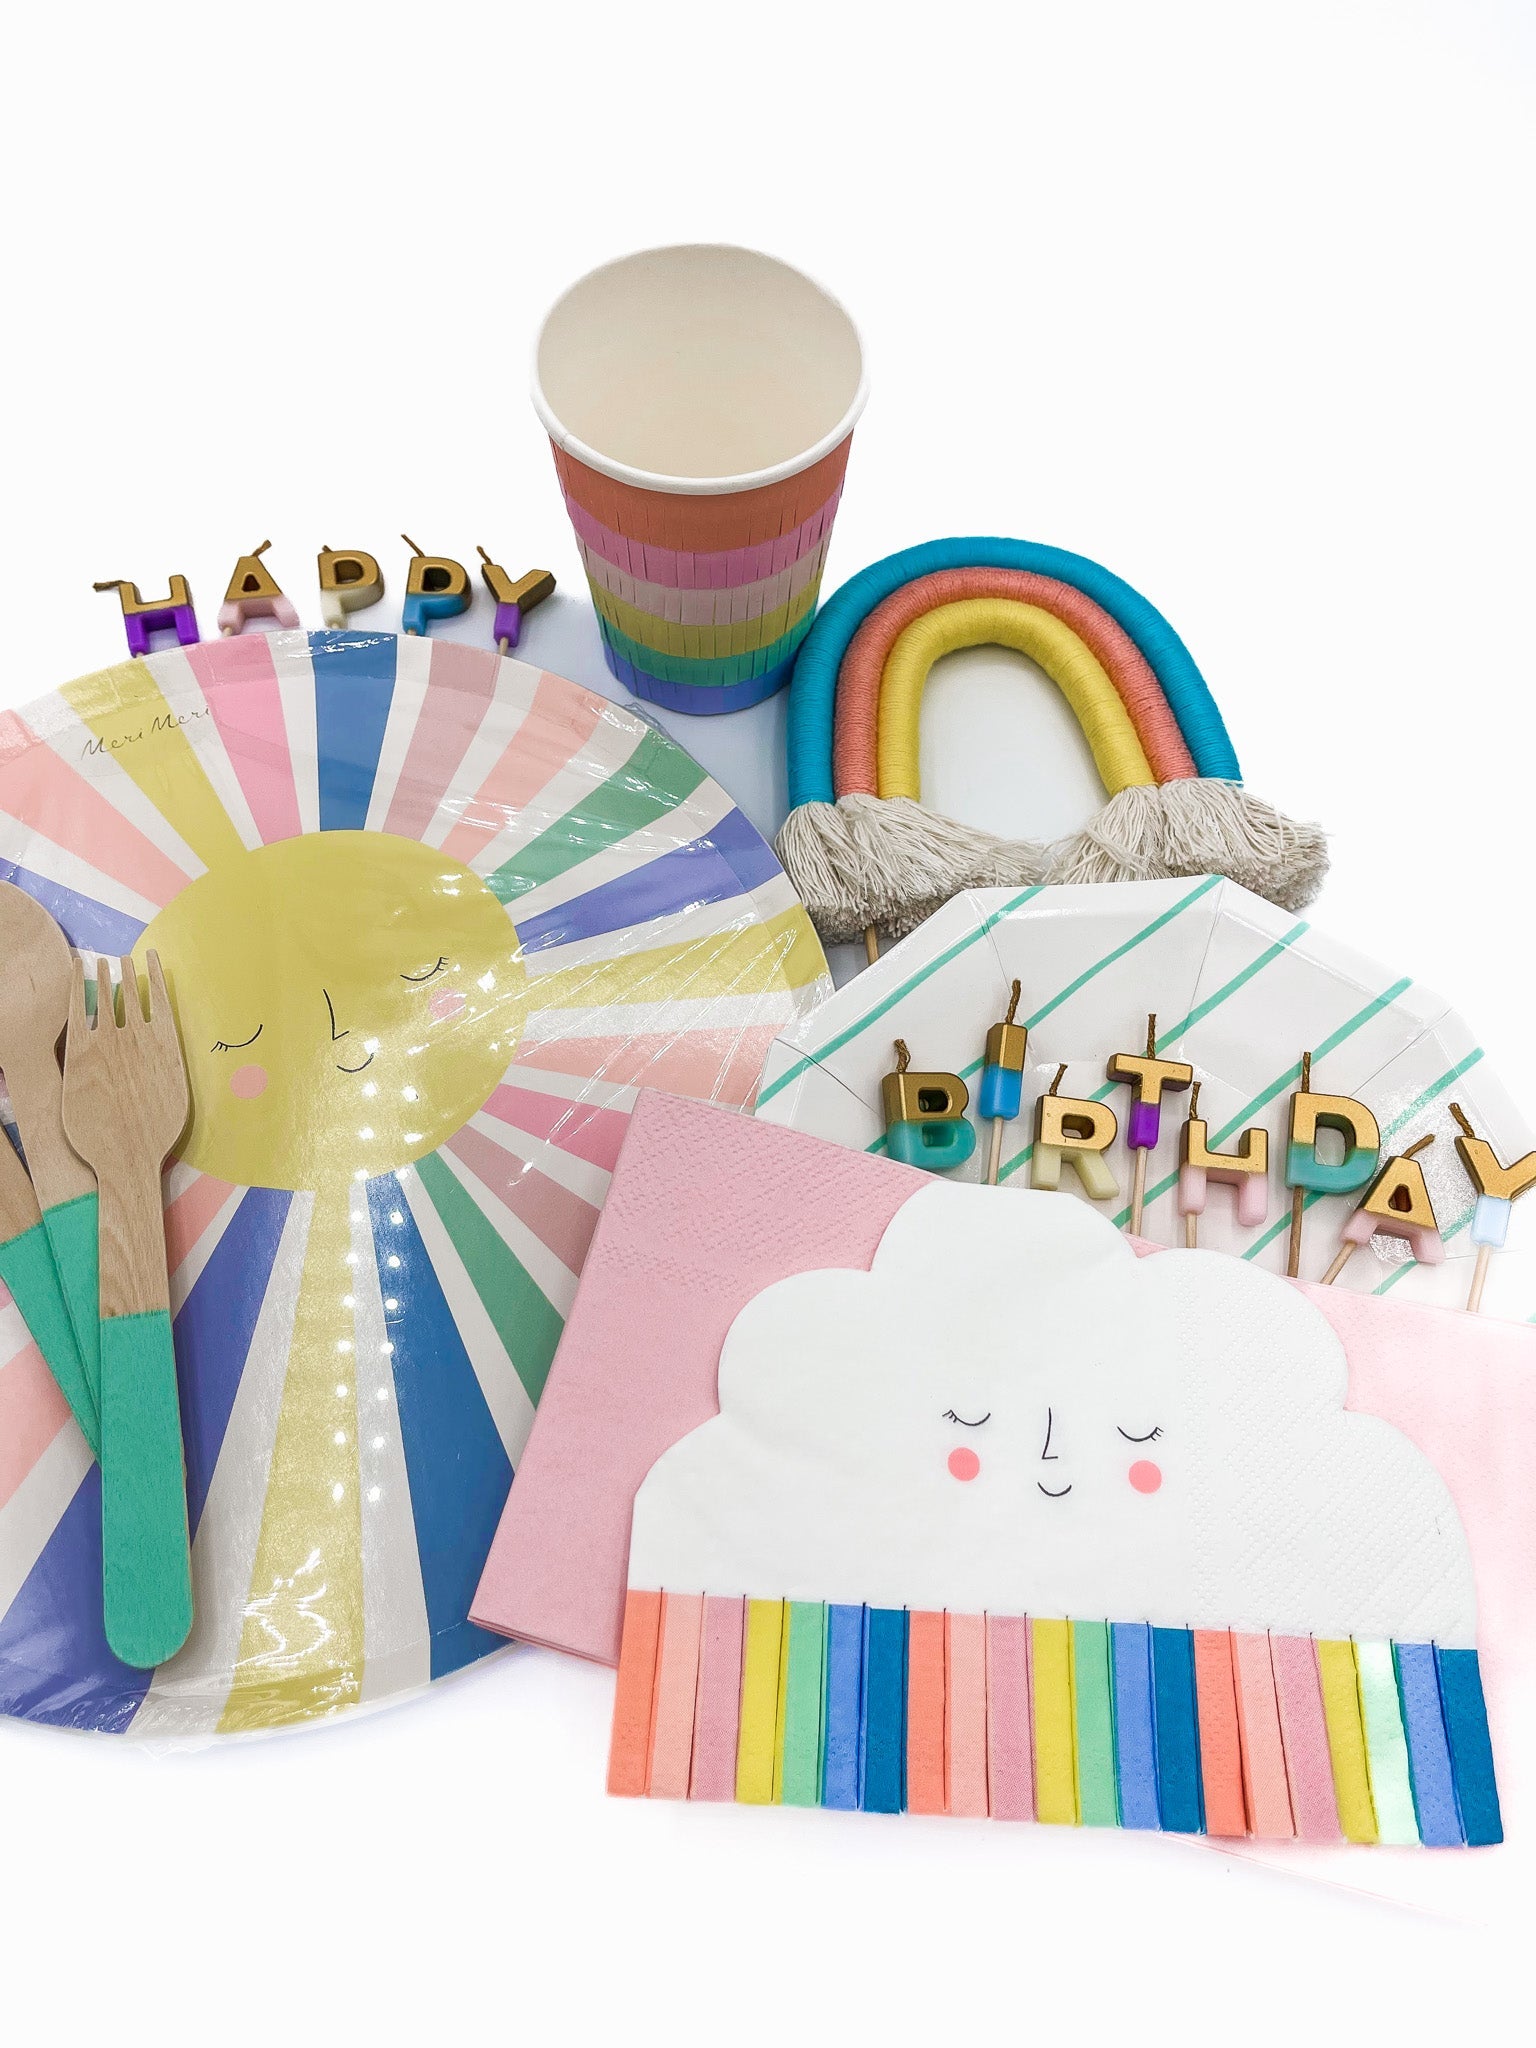 Pastel Rainbow Party In A Box - Oh My Darling Party Co-birthday in a boxparty bundleparty bundles #Fringe_Backdrop#